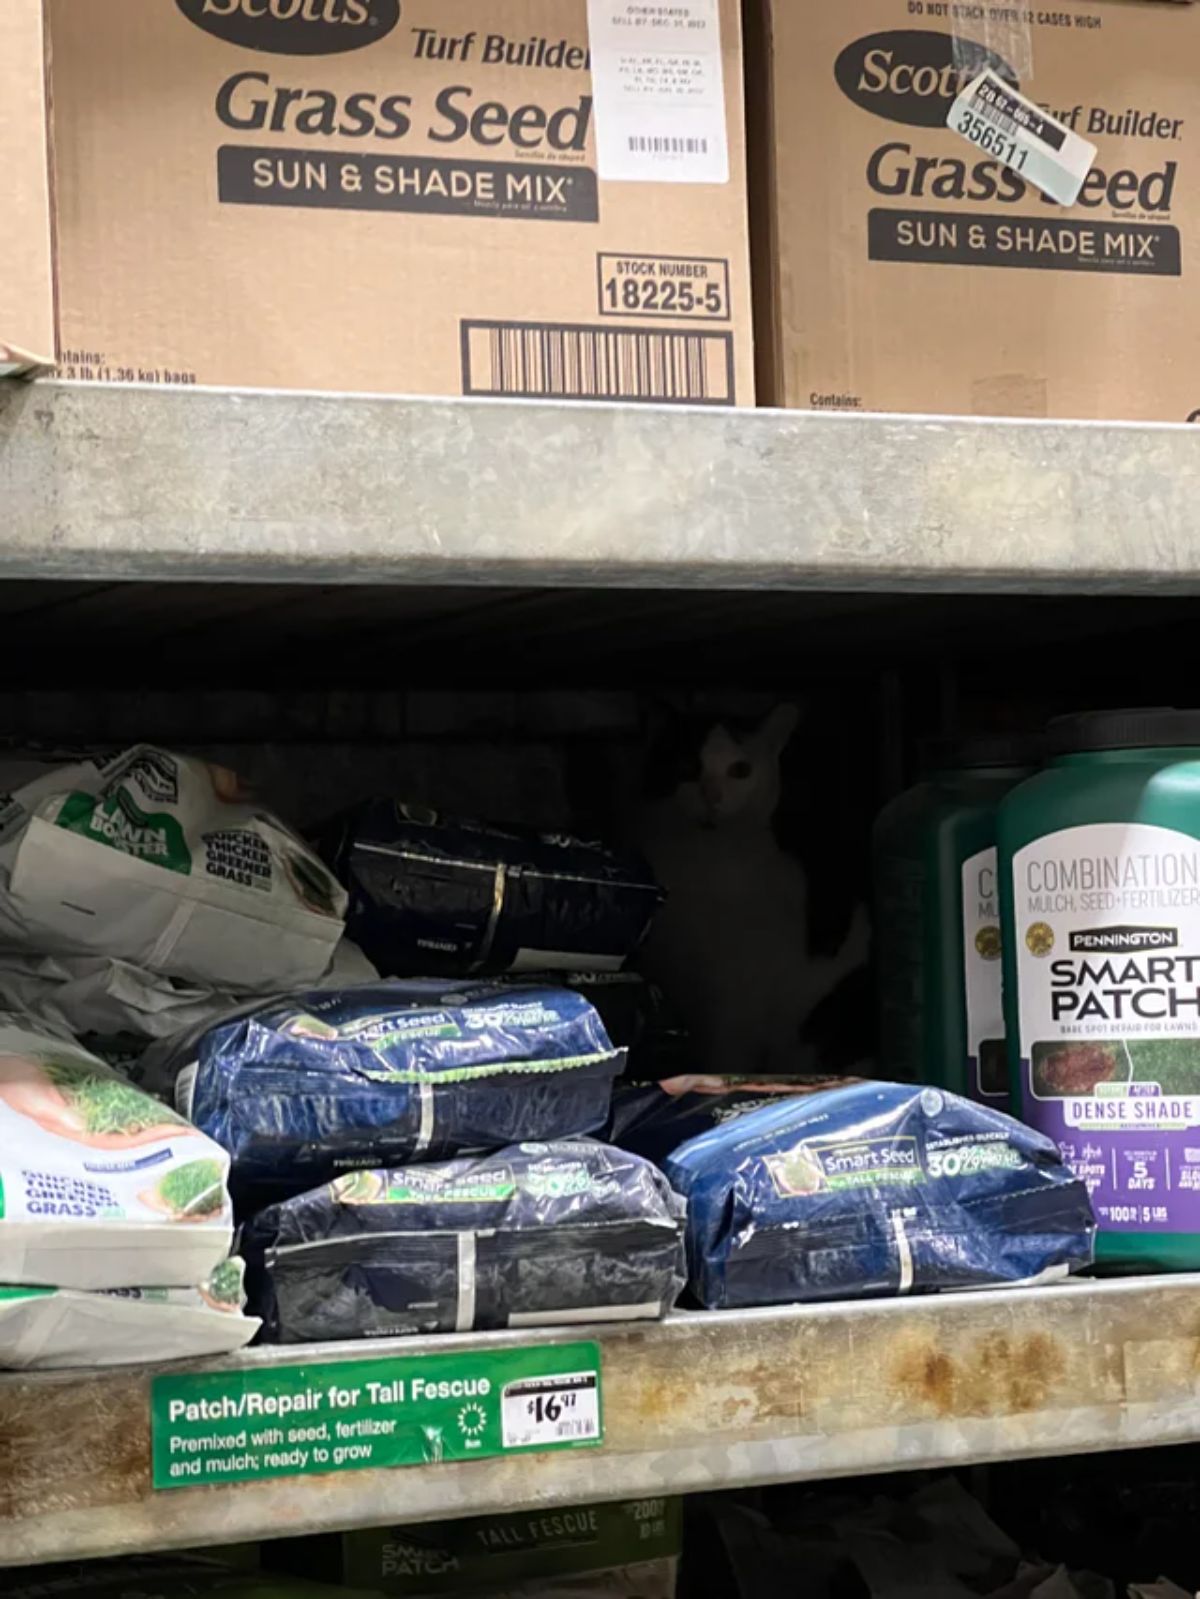 black and white cat sitting on a shelf behind large packs of fertiliser in a store